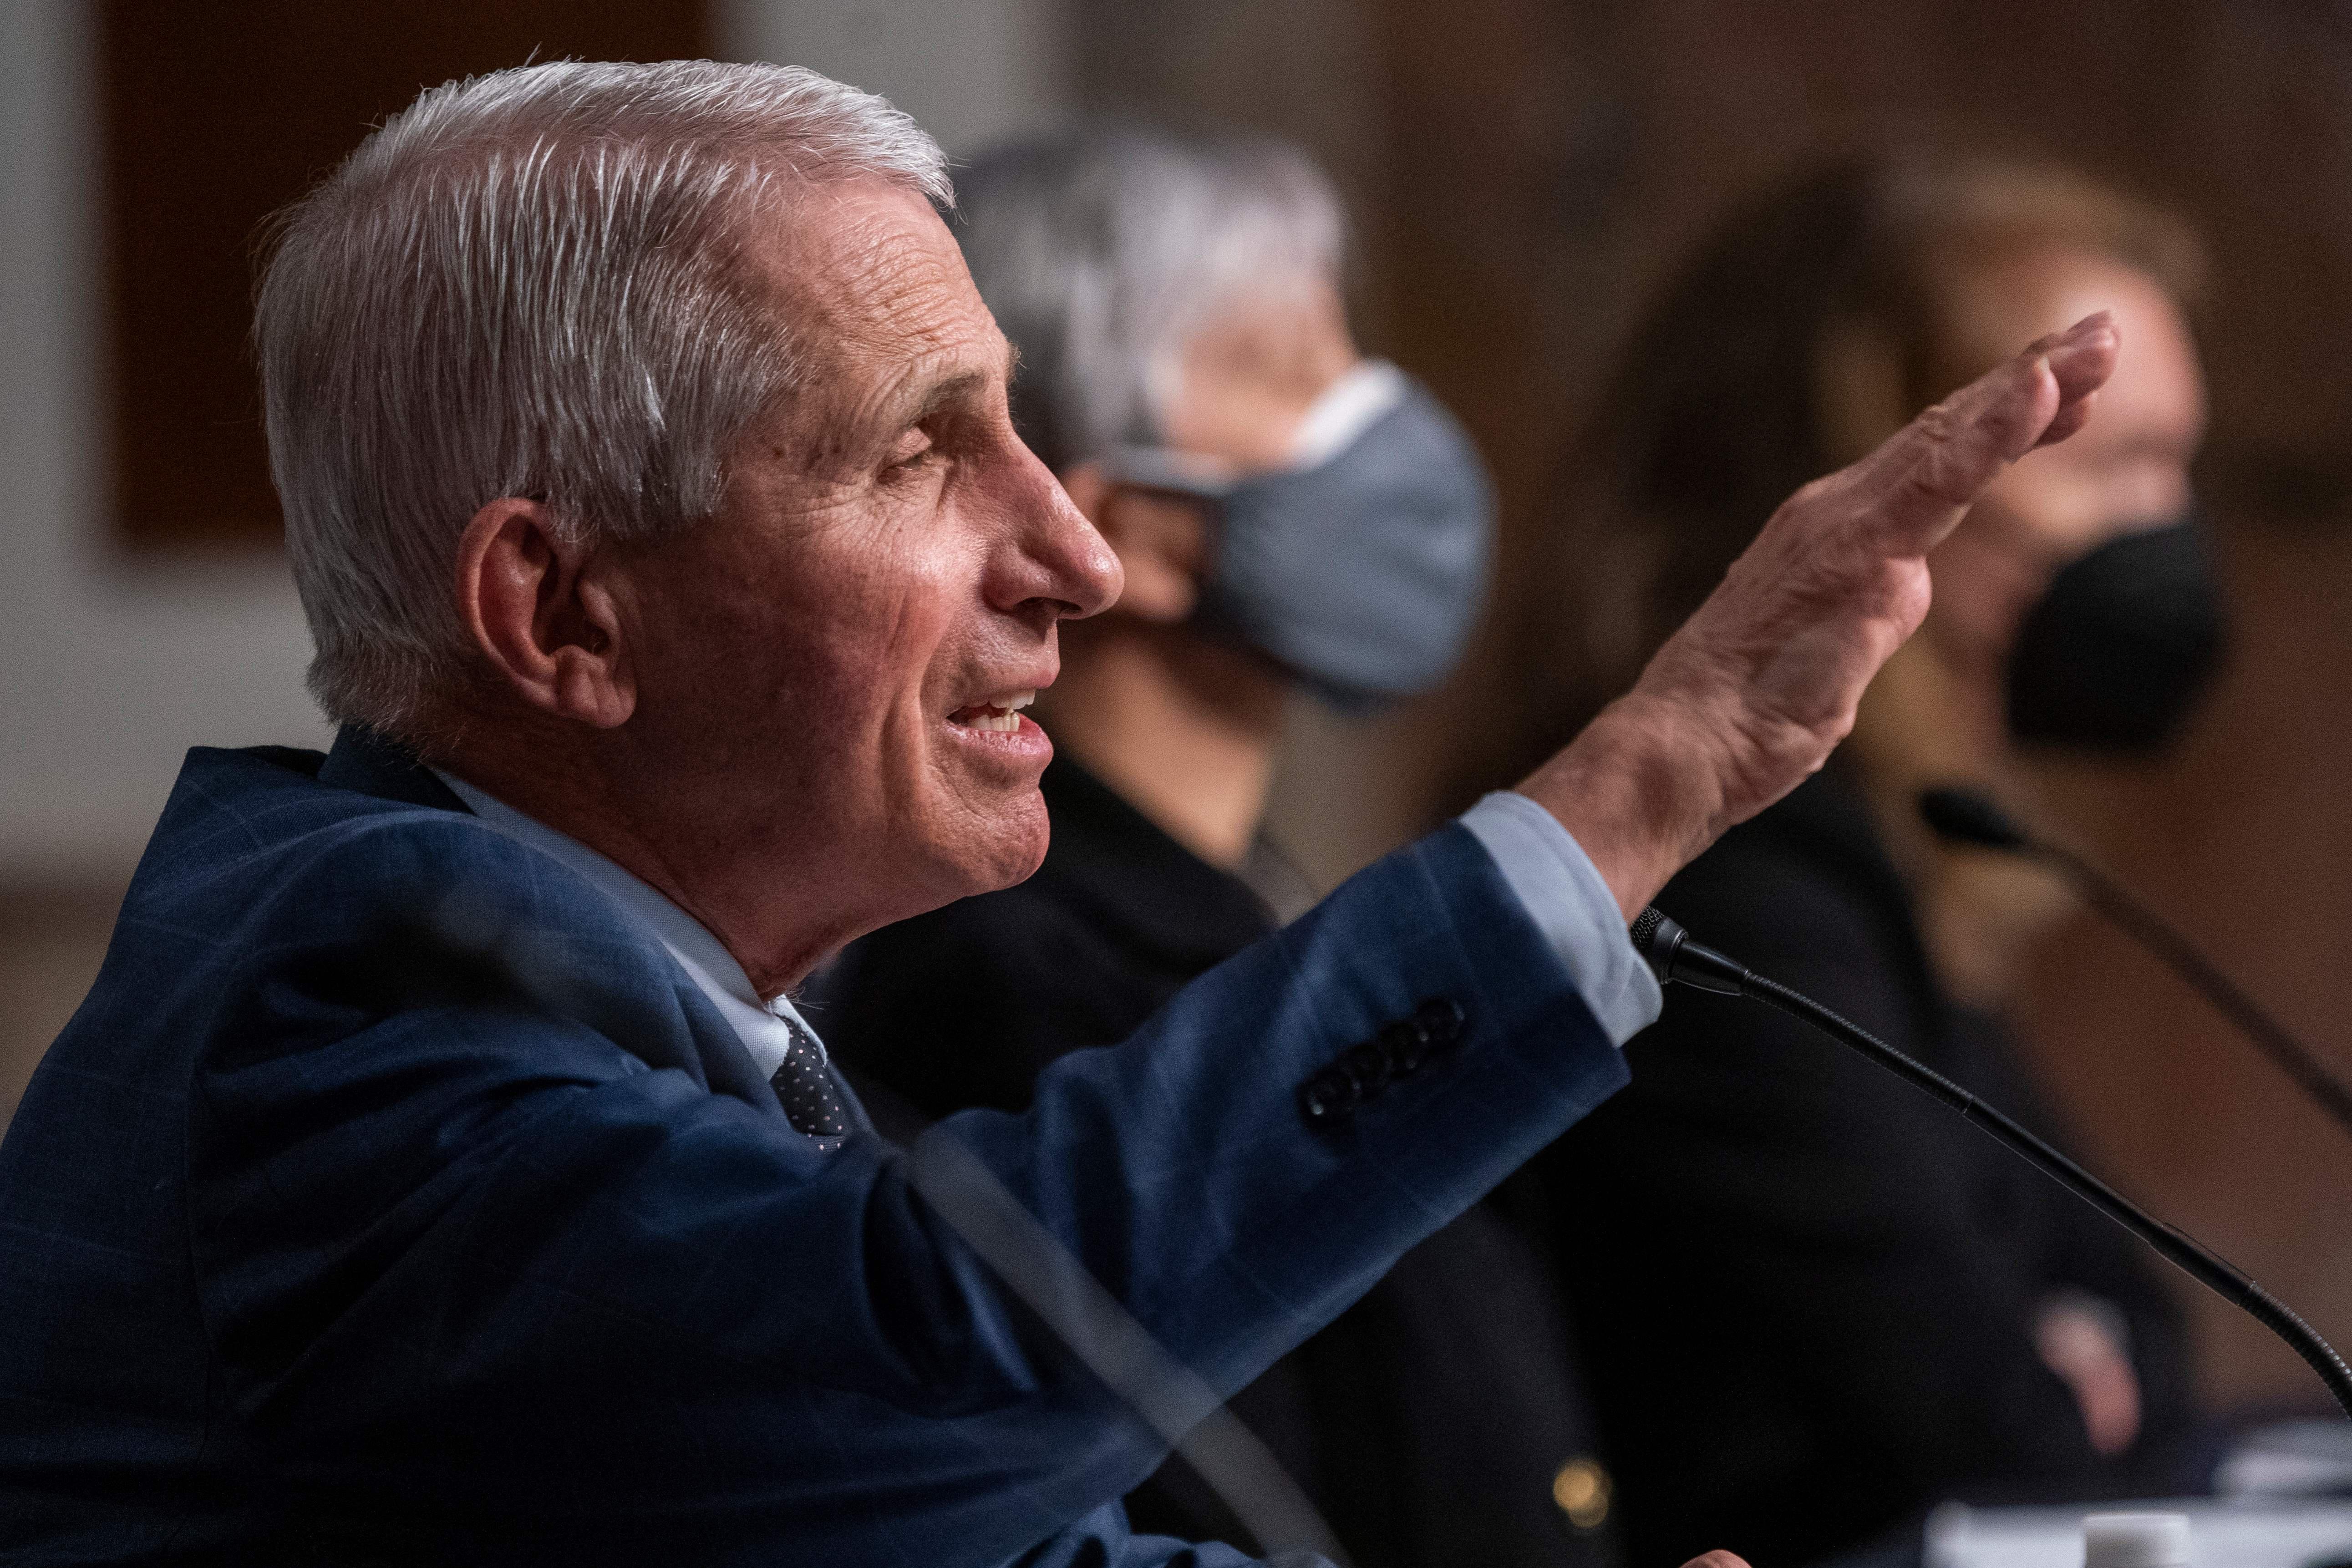 Dr. Anthony Fauci gives an opening statement during a Senate Health, Education, Labor, and Pensions Committee hearing on Jan. 11, 2022 at Capitol Hill in Washington, D.C.